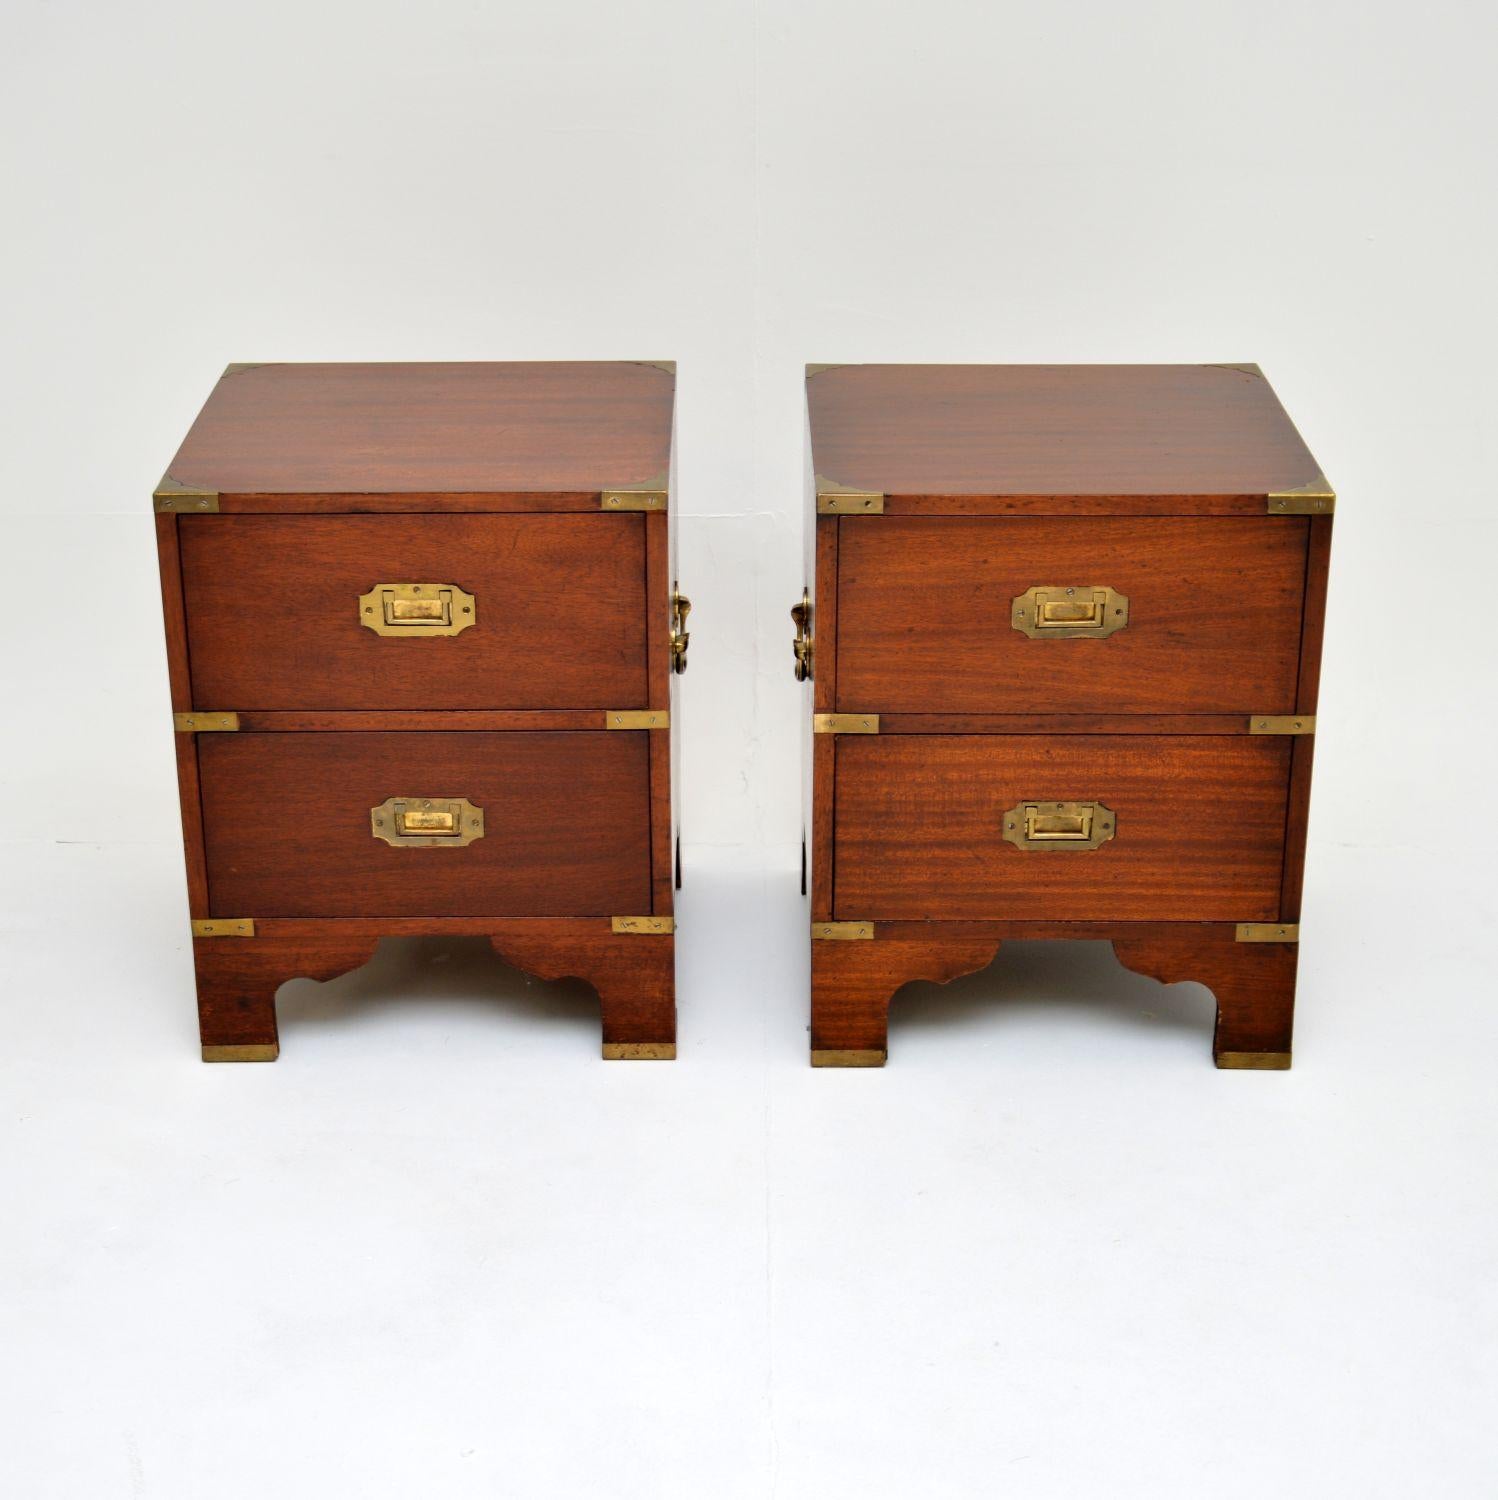 A fantastic pair of antique bedside chests in the military campaign style. They were made in England, and date from around the 1920-1930s.

They are of superb quality and are a lovely size, perfect for use as bedside chests or even as side tables